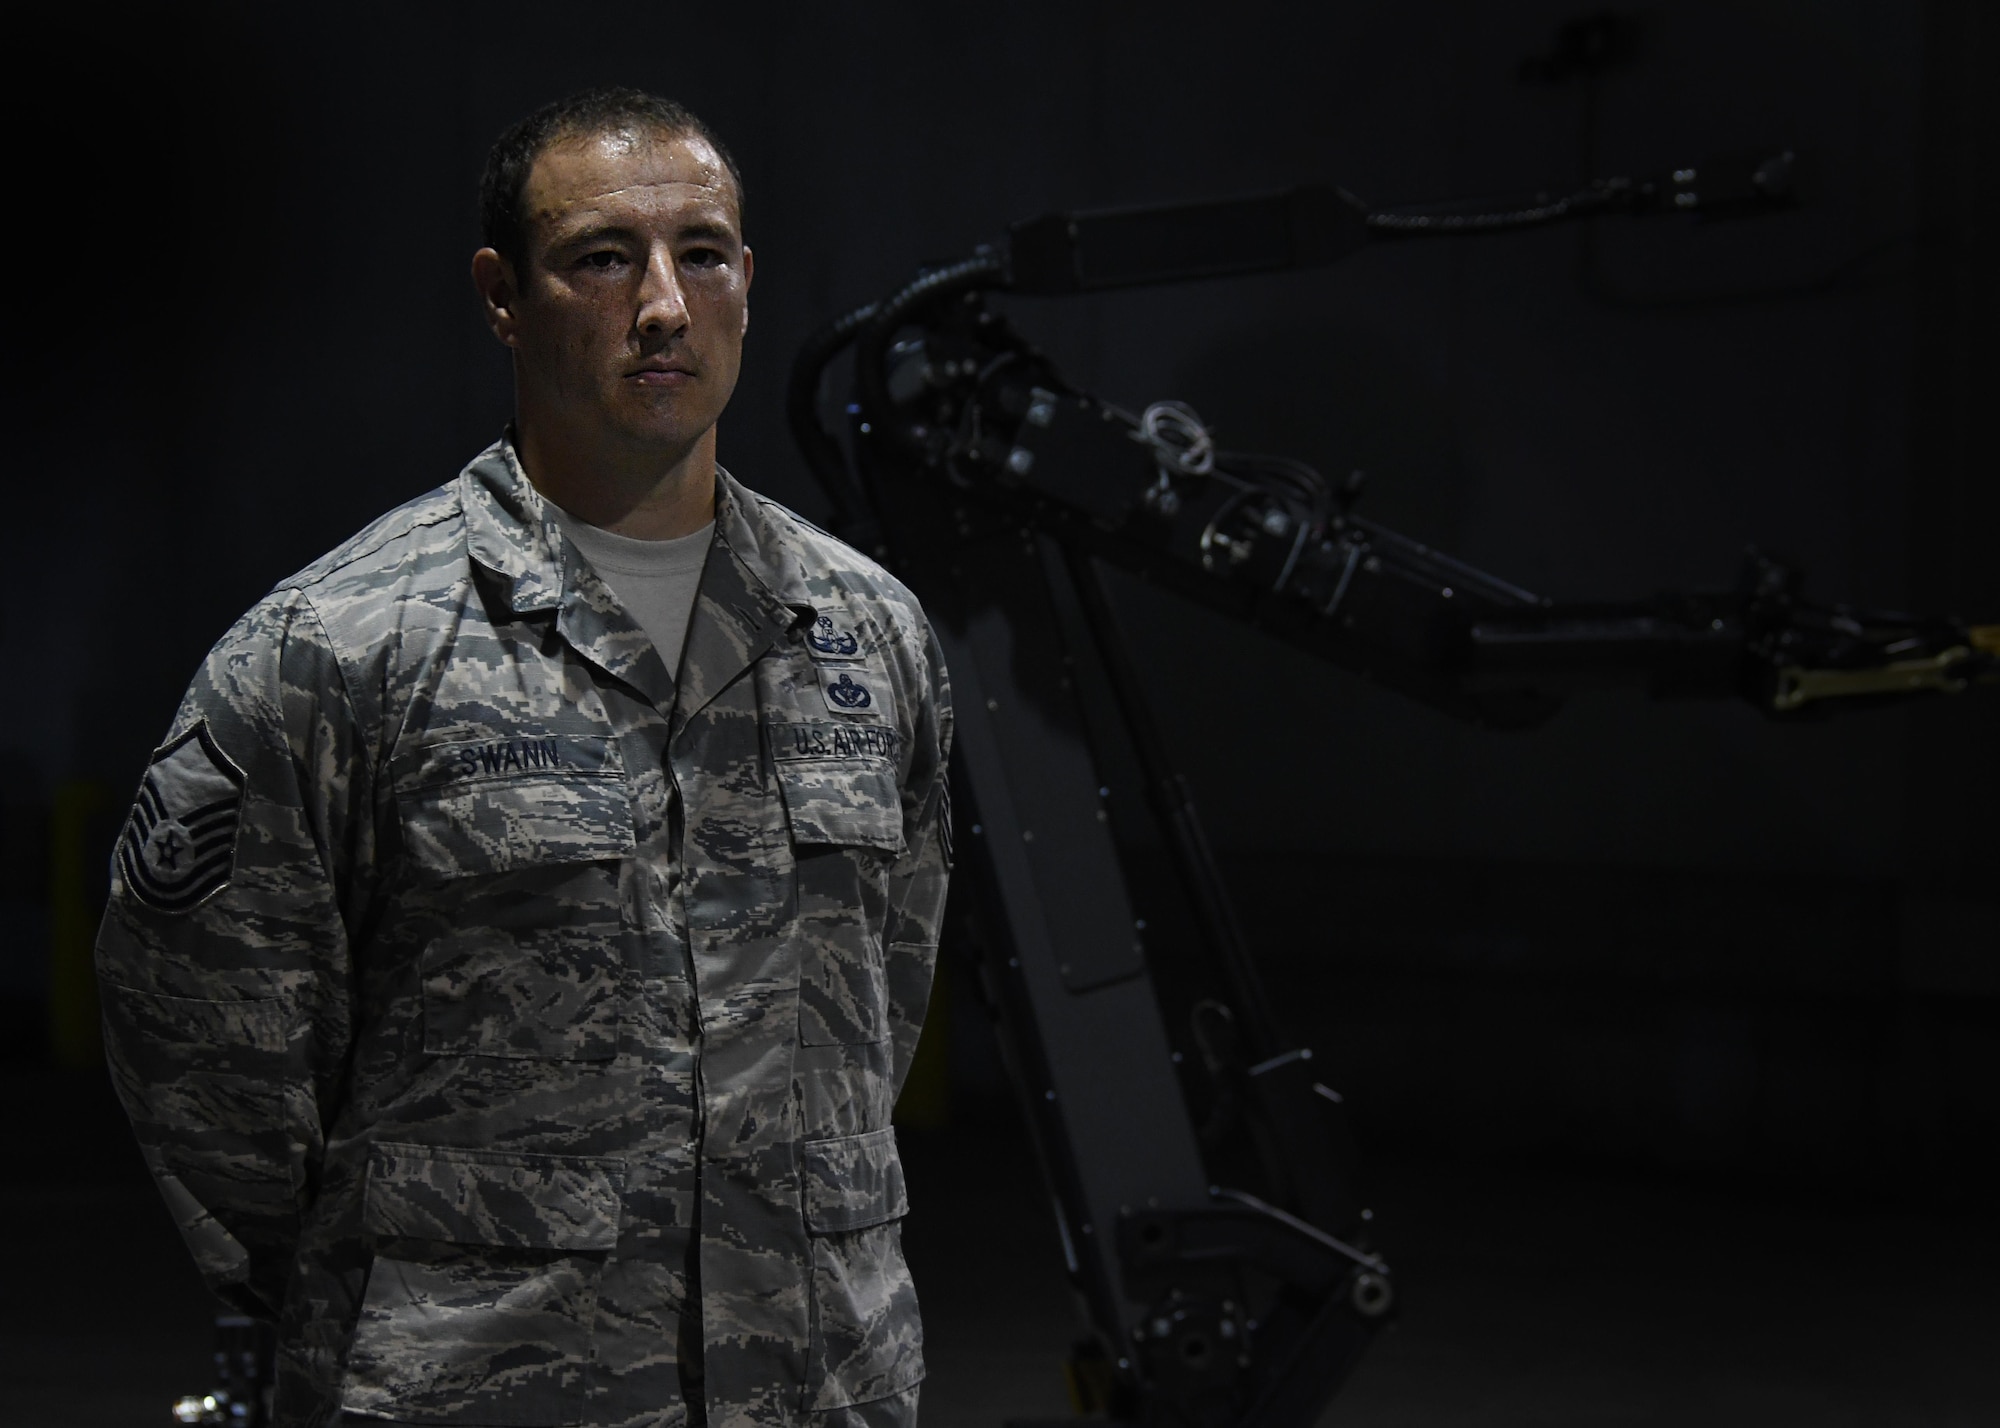 Master Sgt. Richard Swann, 94th explosive ordnance disposal flight operations section chief, poses for a photo in front of an EOD robot in a hangar at Hartsfield Jackson International Airport, Atlanta on Aug. 23, 2017. Swann helped coordinate this year's Eastern Robot Rodeo, hosted at Dobbins Air Reserve Base, Ga. (U.S. Air Force photo/Staff Sgt. Miles Wilson)